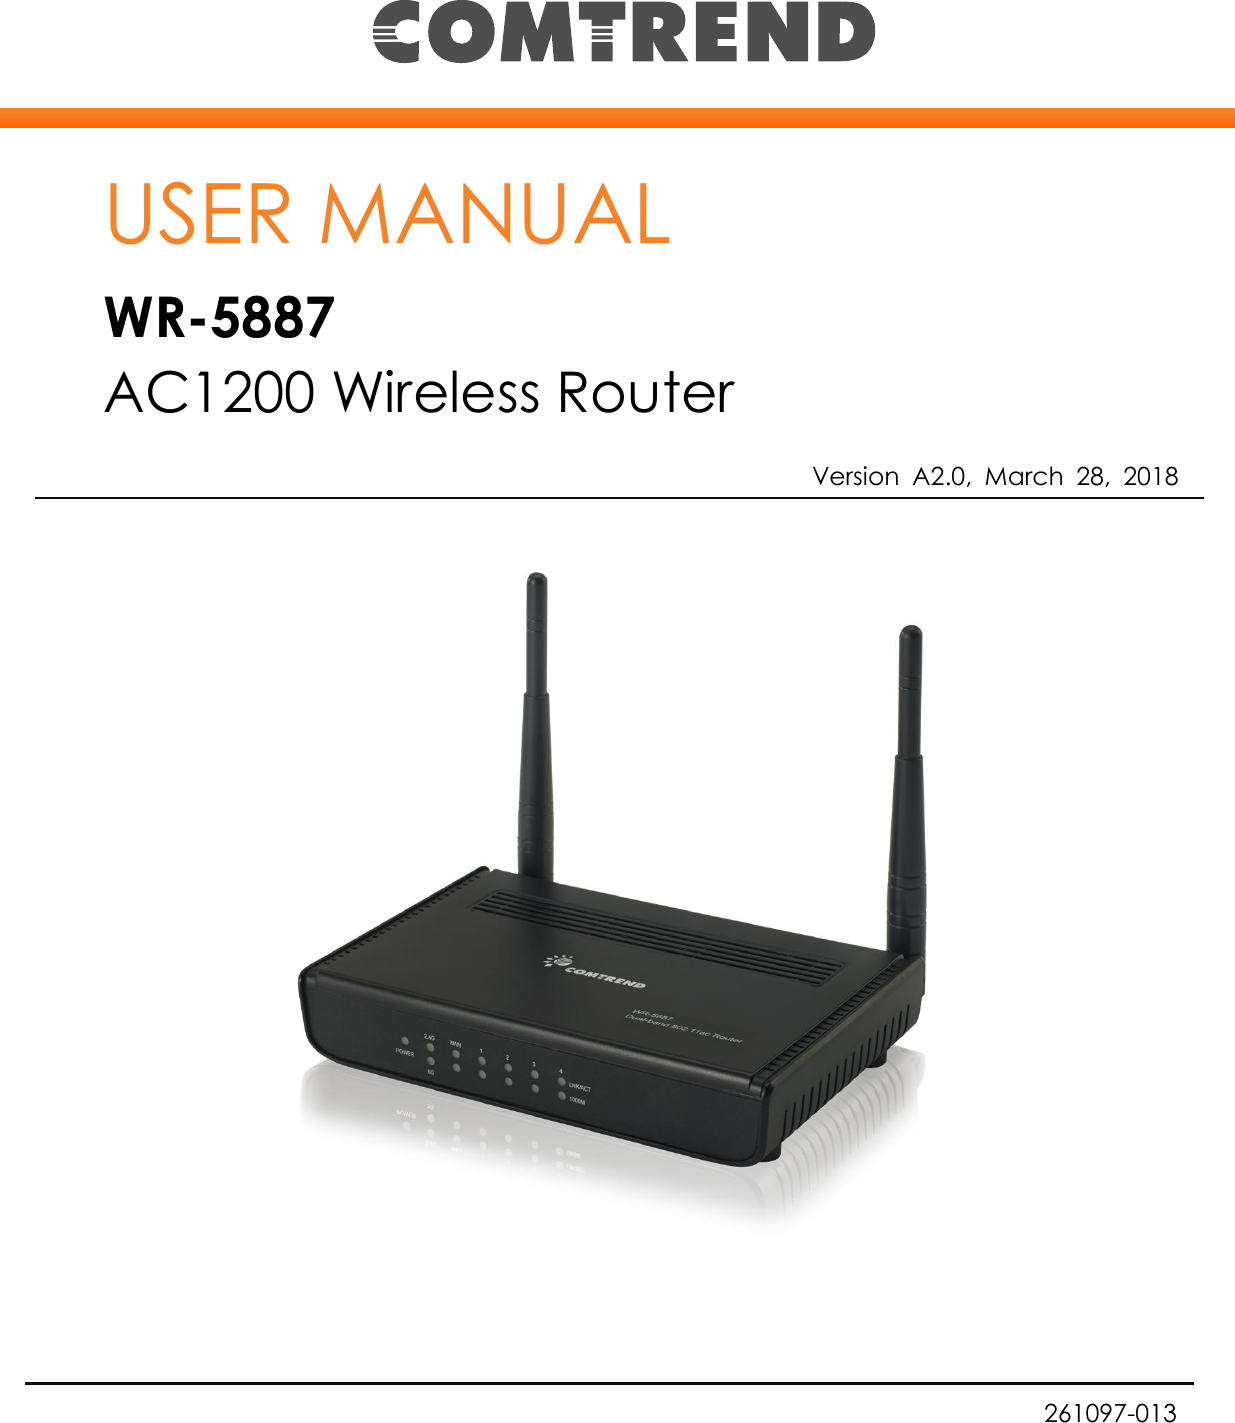  USER MANUAL WR-5887 AC1200 Wireless Router Version  A2.0,  March  28,  2018 261097-013 